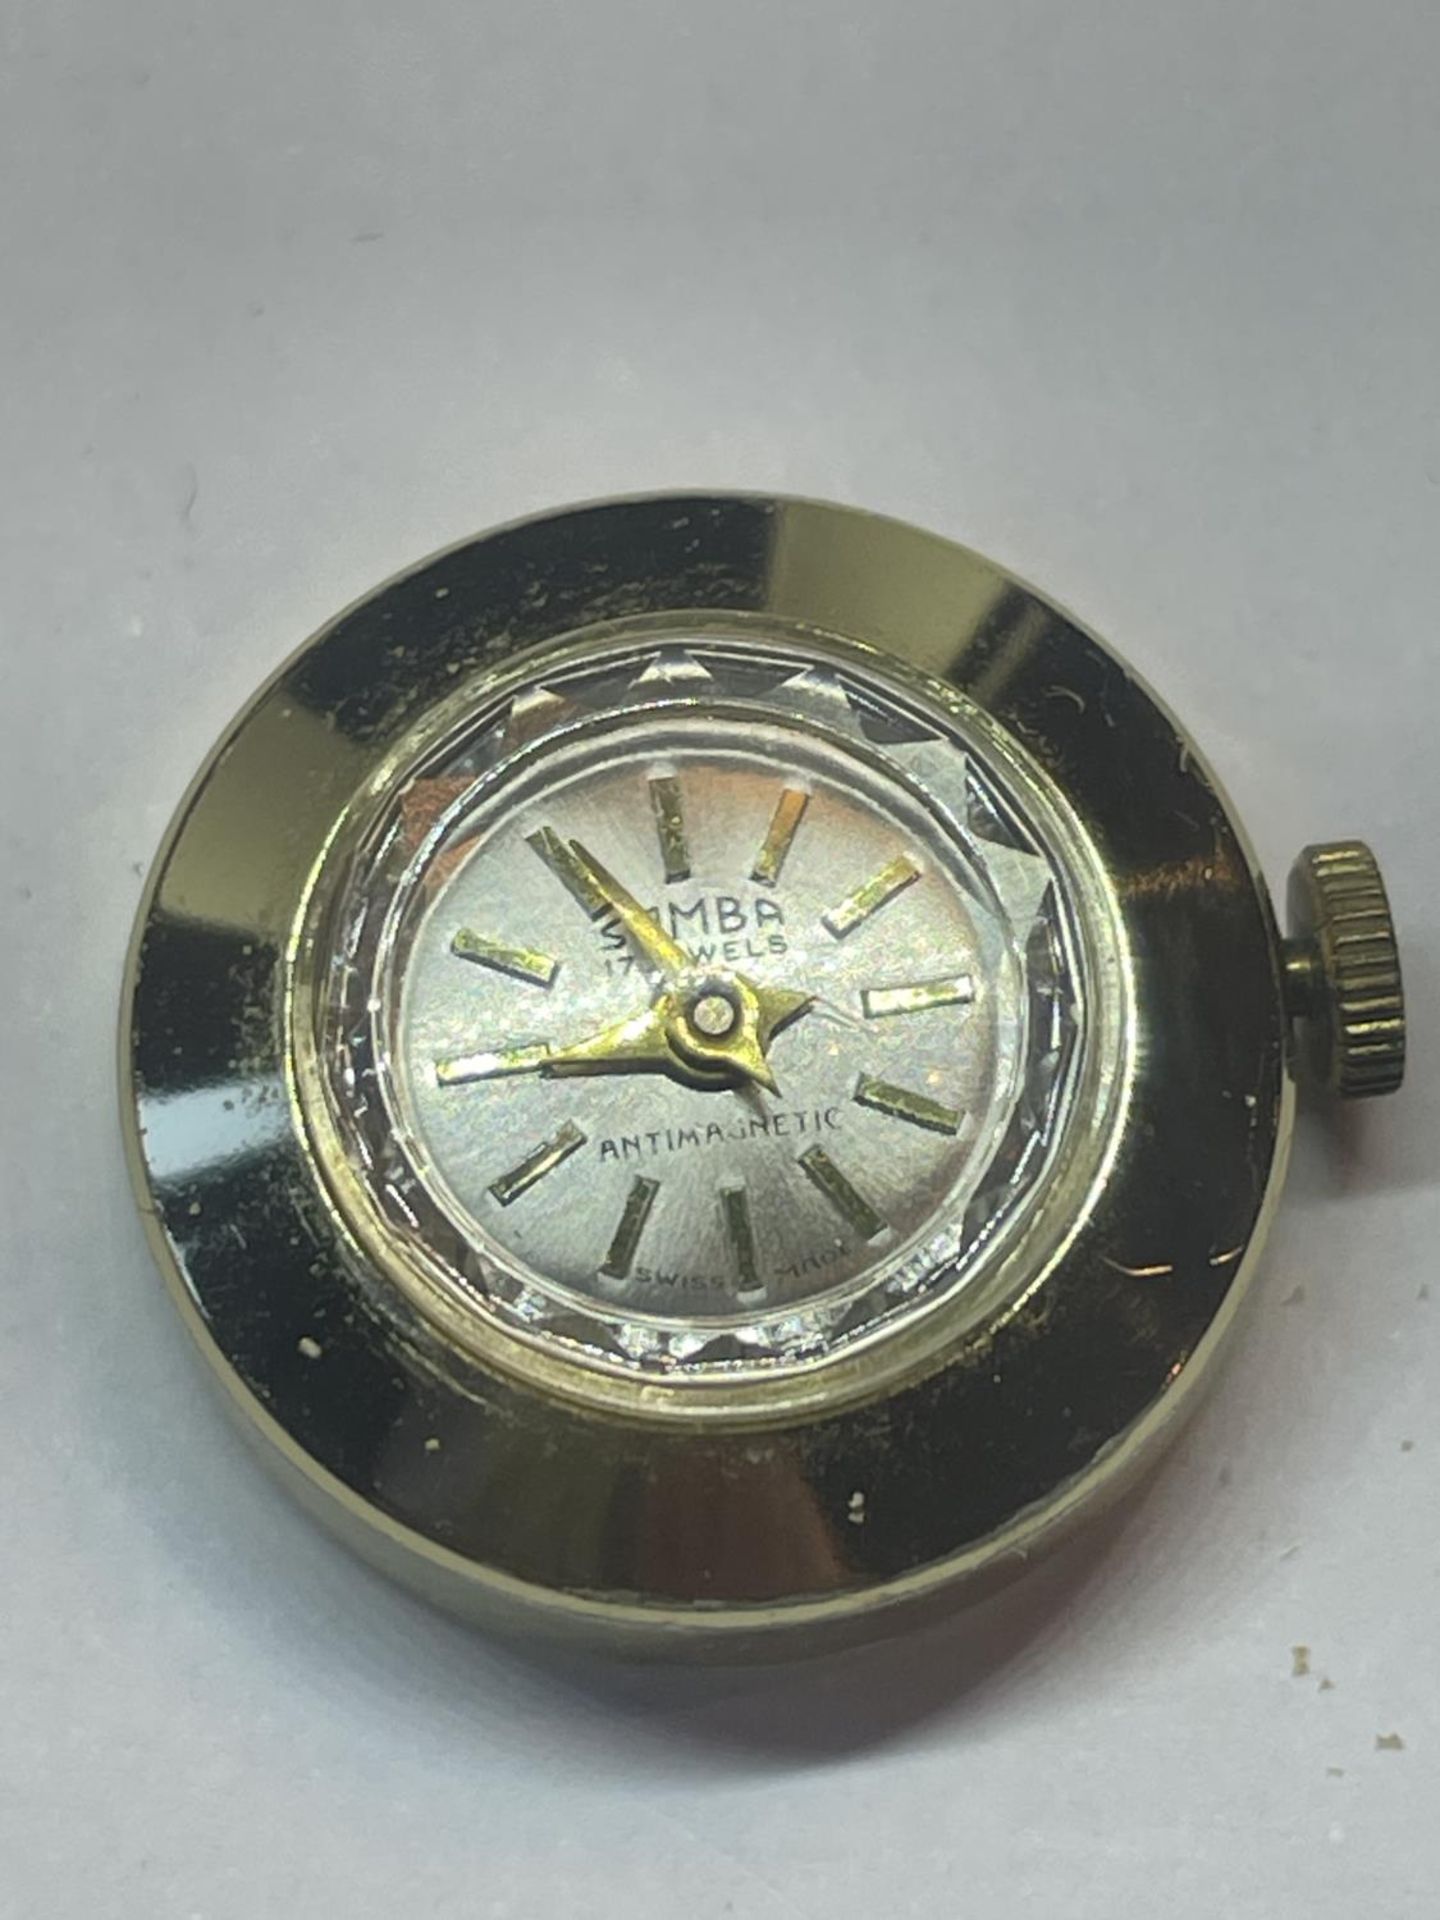 A SAMBA PANORAMA VINTAGE WATCH WITH STRAPS AND FACE SURROUNDS IN ORIGINAL PRESENTATION BOX - Image 6 of 6